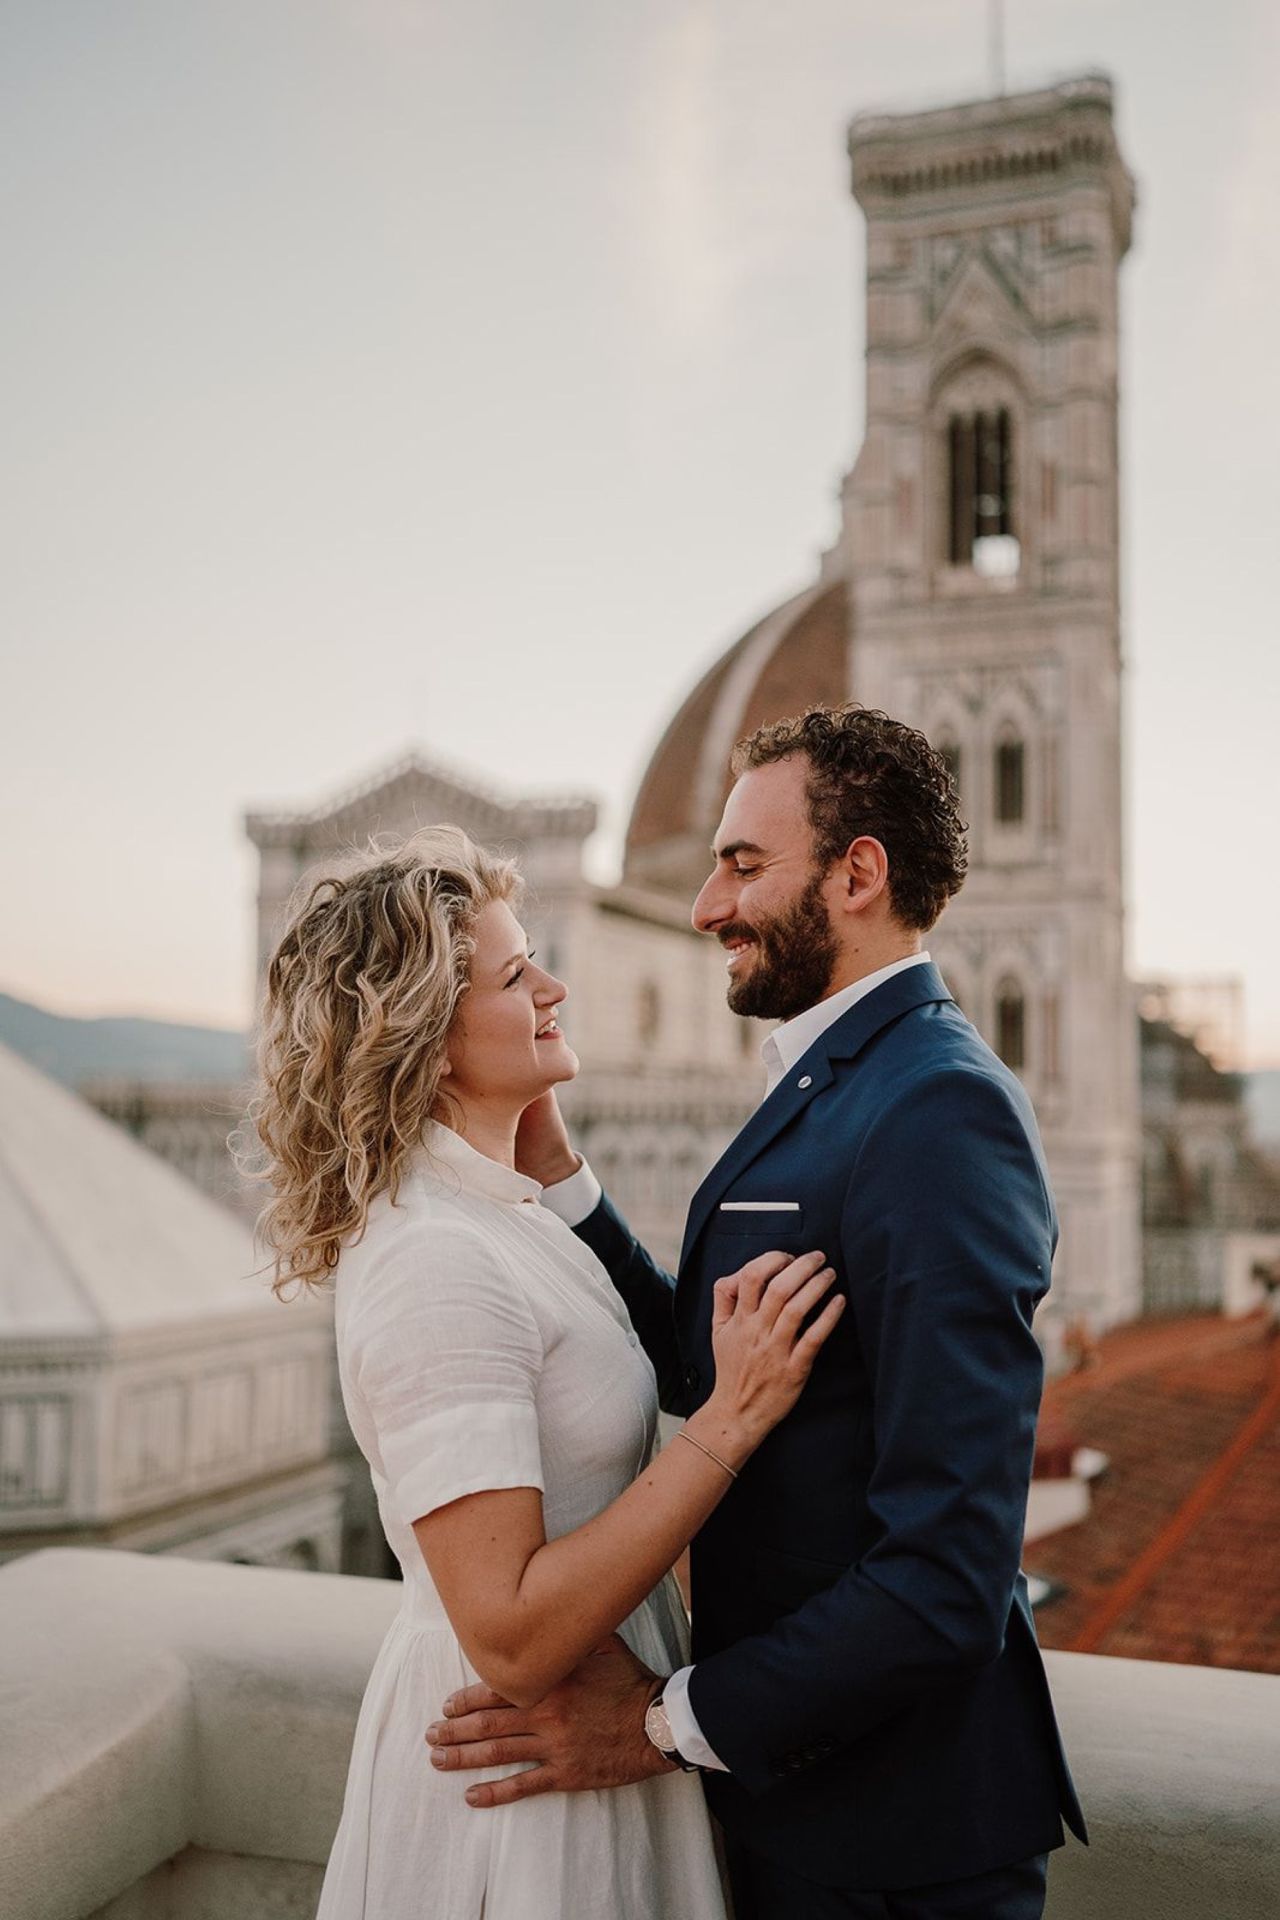 It's been five years since Kacie and Dario met in Florence and now they live there together.